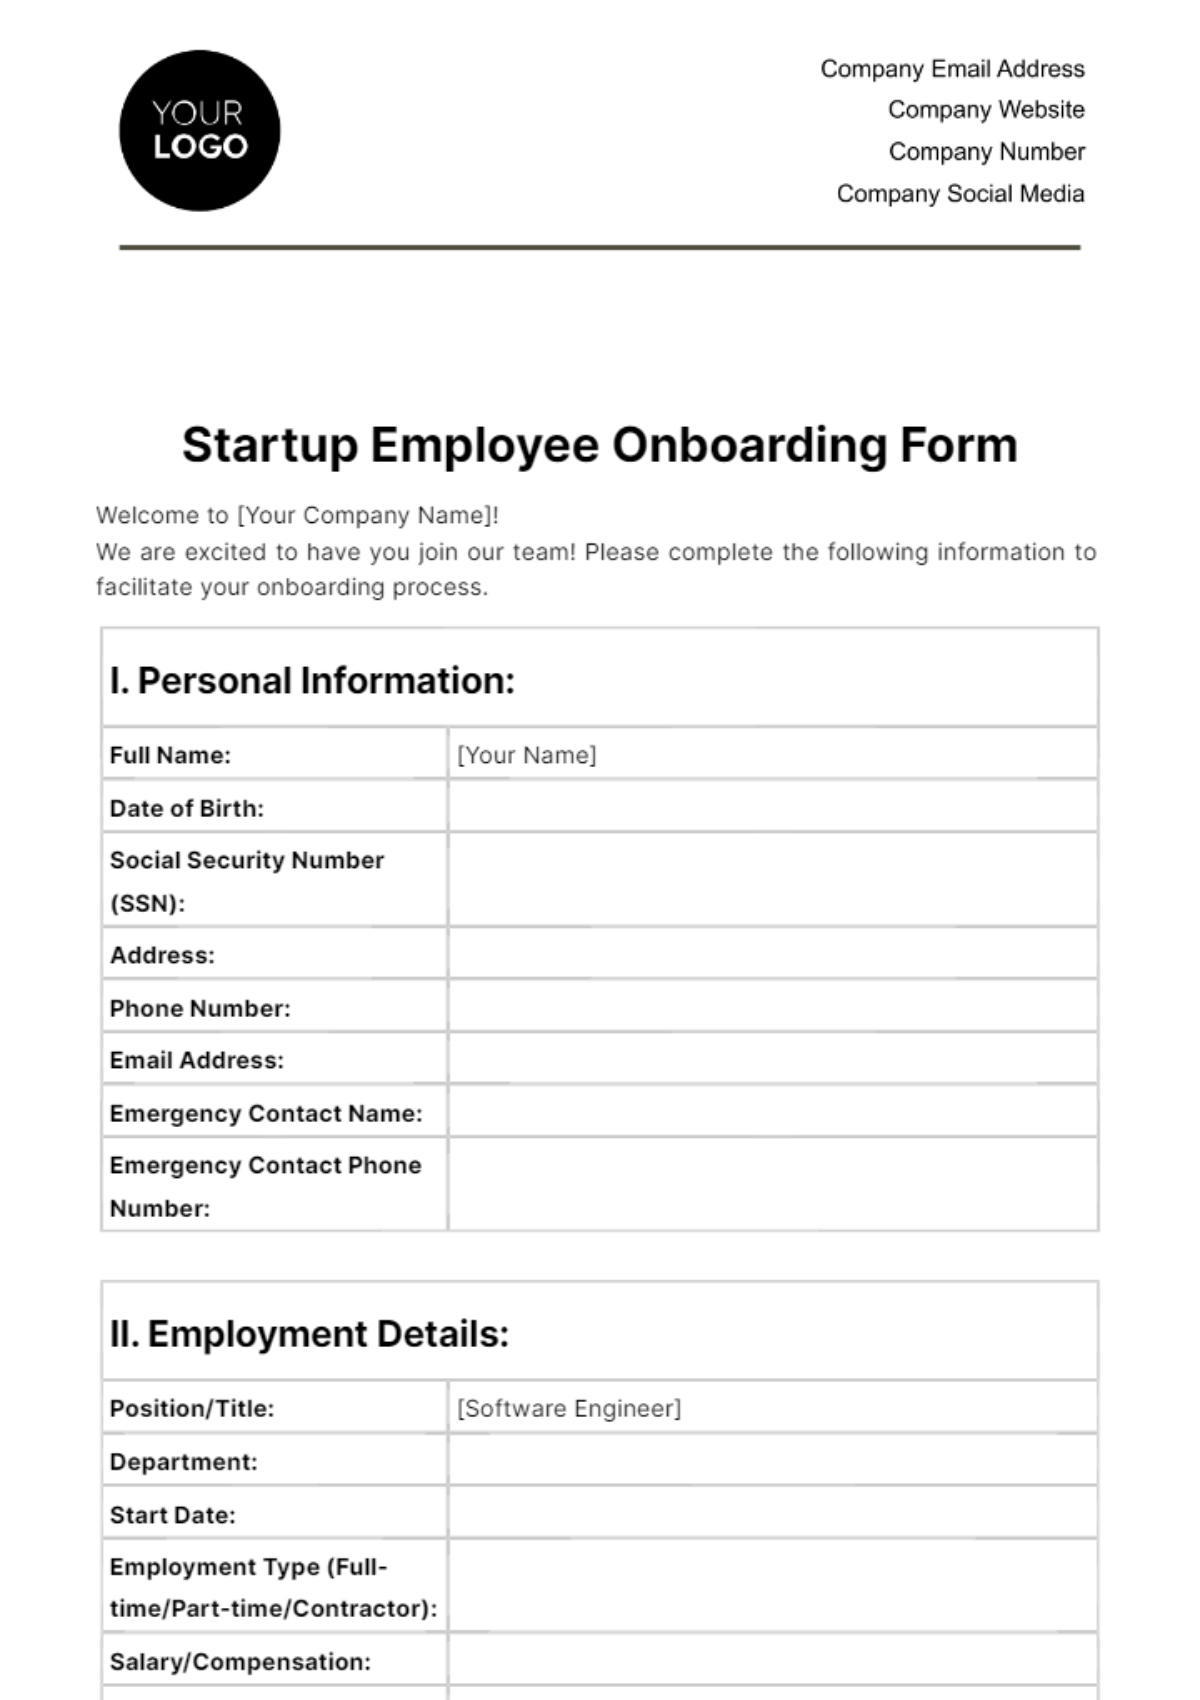 Free Startup Employee Onboarding Form Template